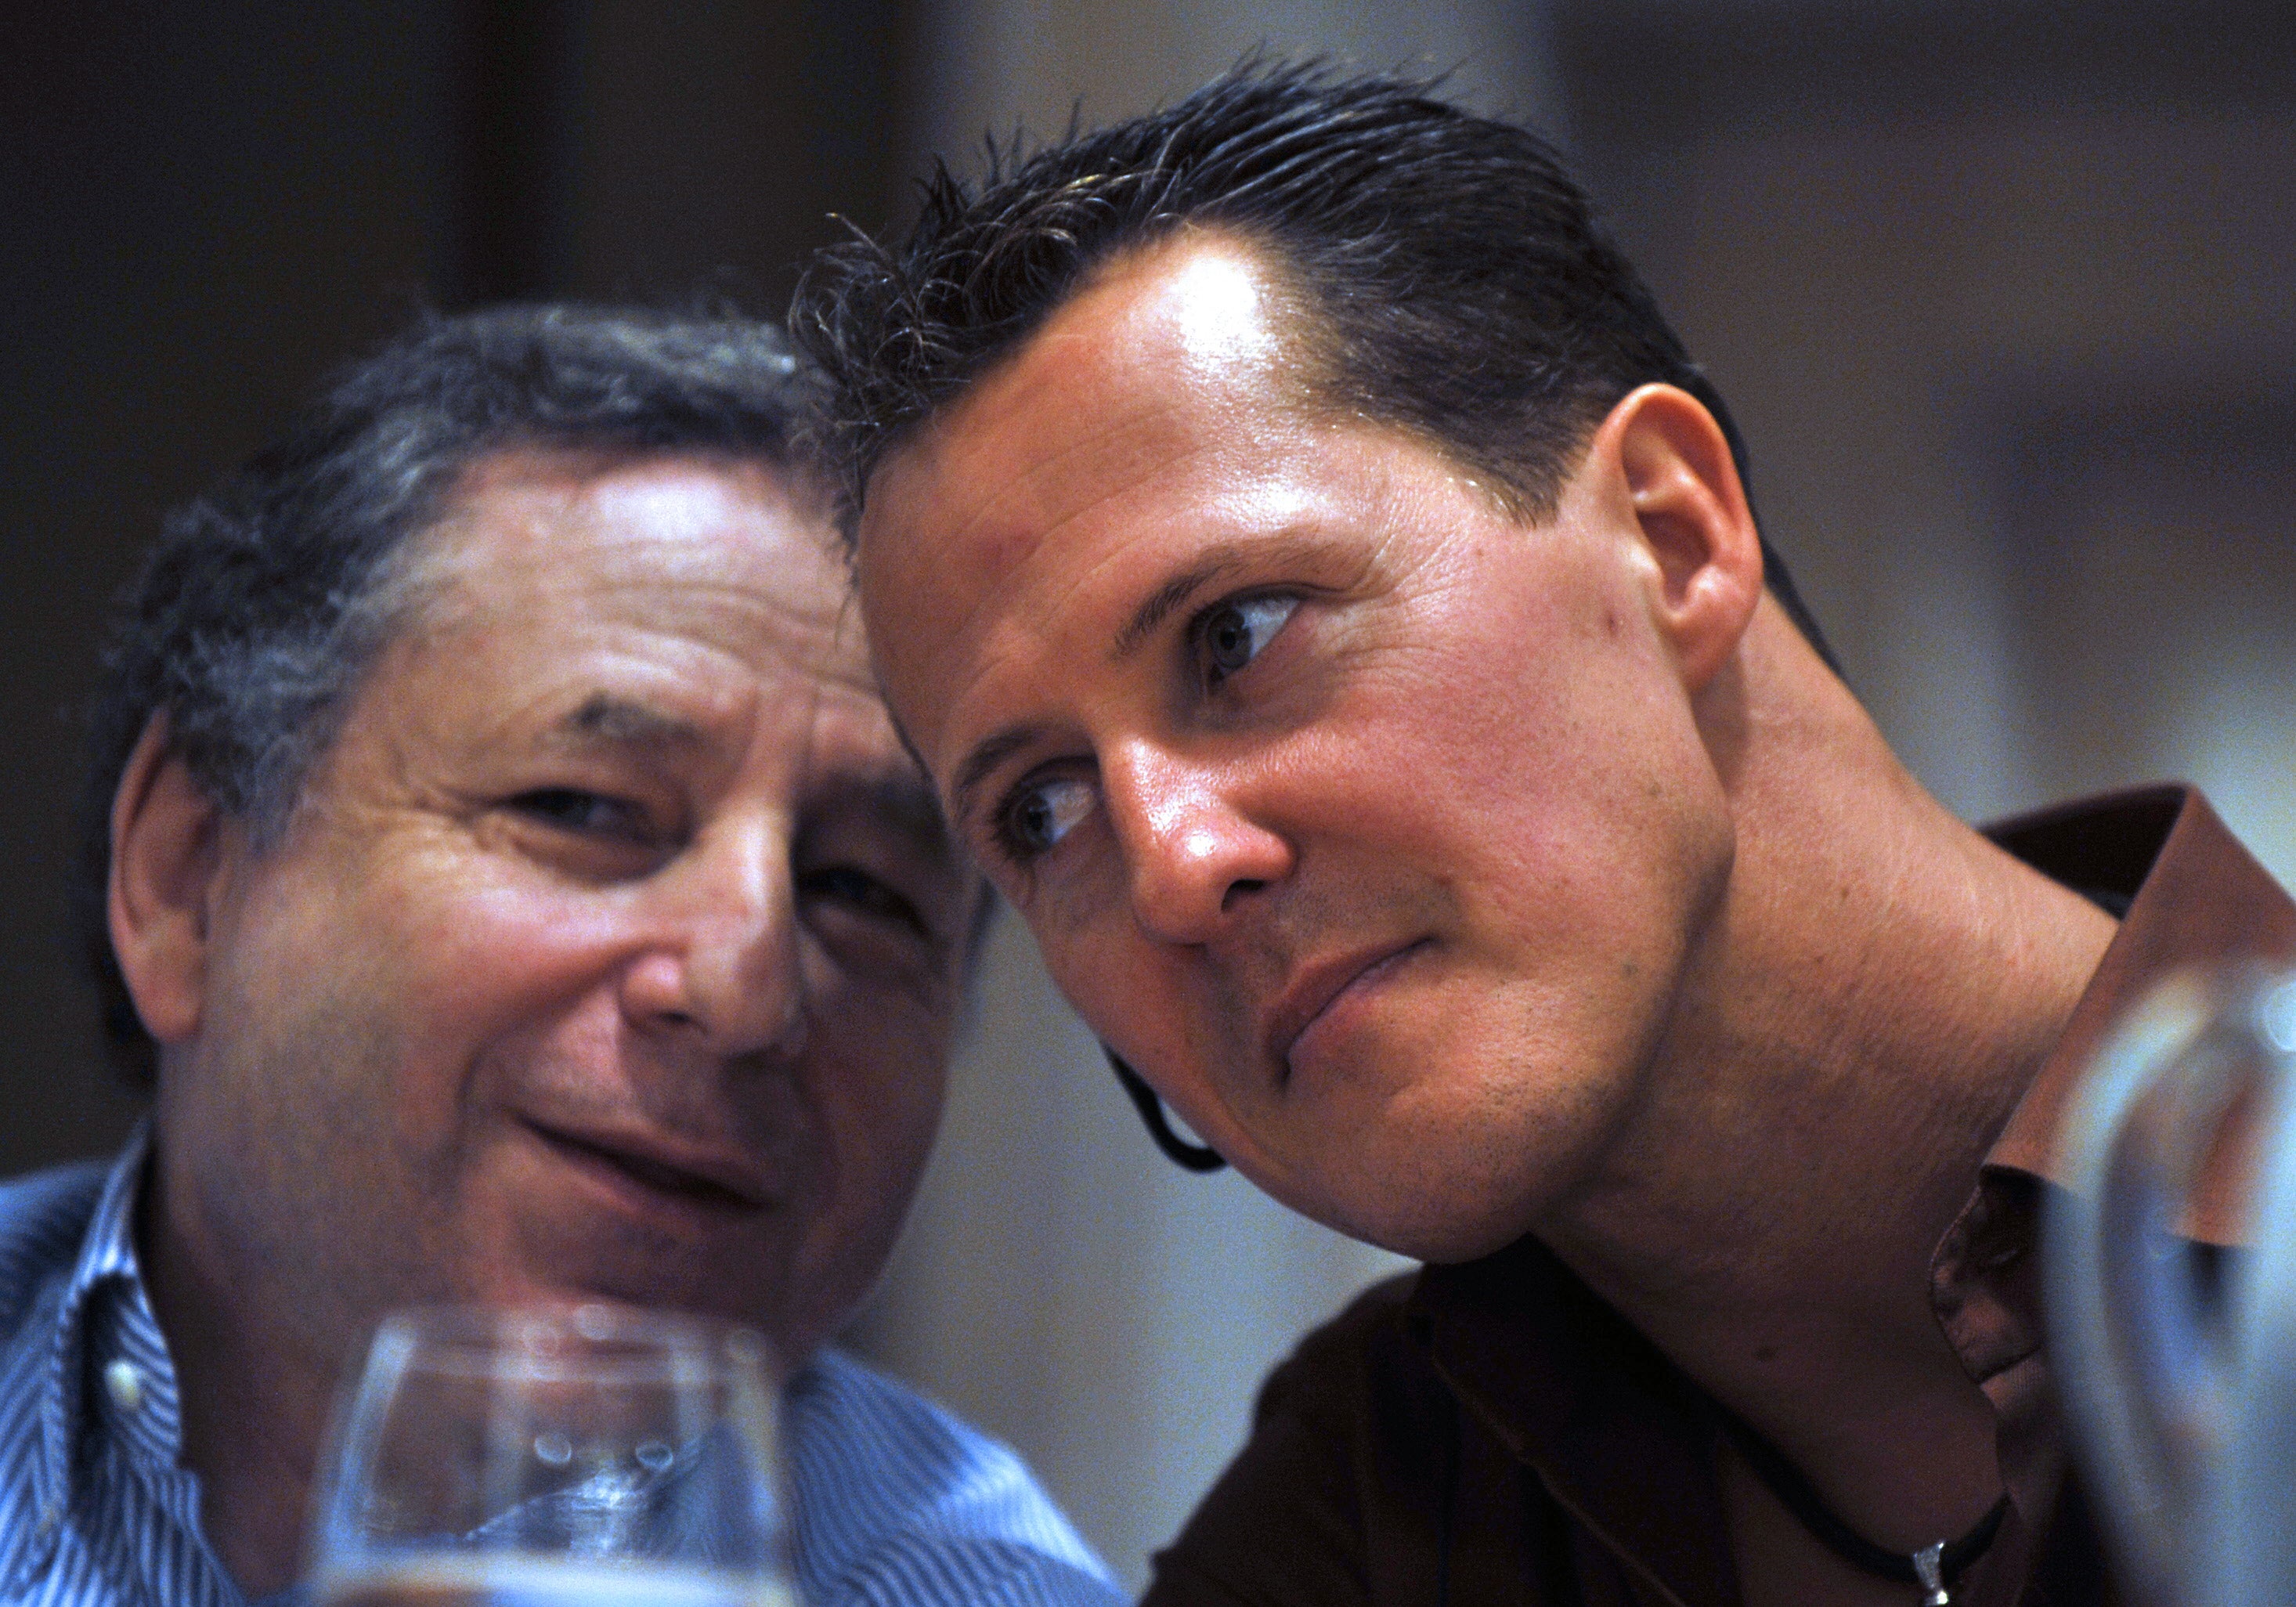 Michael Schumacher is in “the best of hands” as he continus to recover from his horrific skiing accident, says ex-Ferrari boss Jean Todt